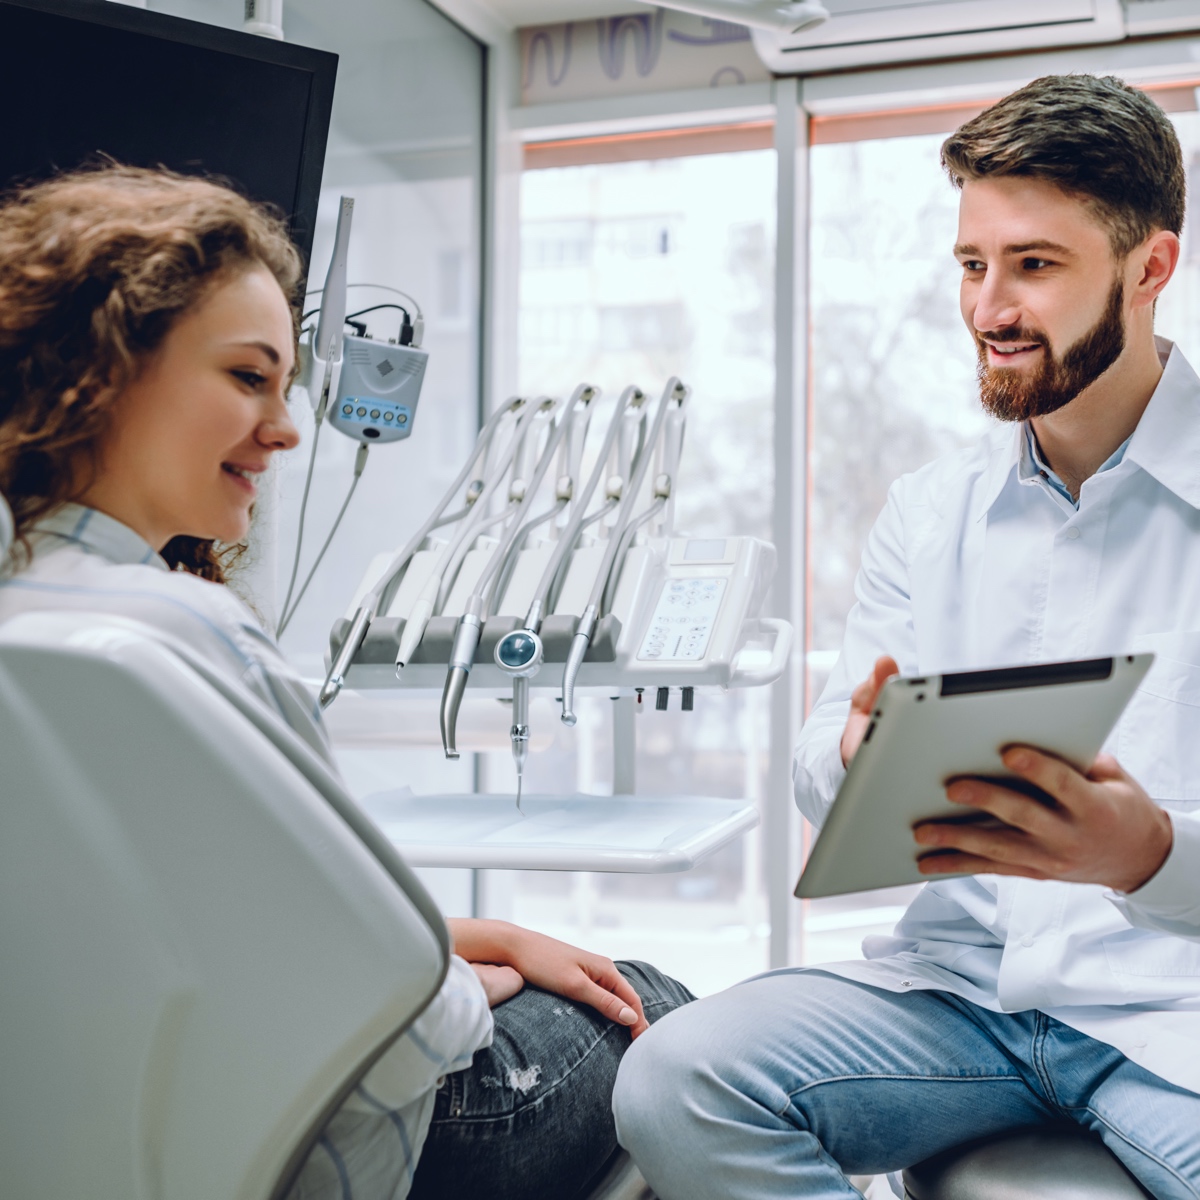 Dentist discussing dental treatment with patient